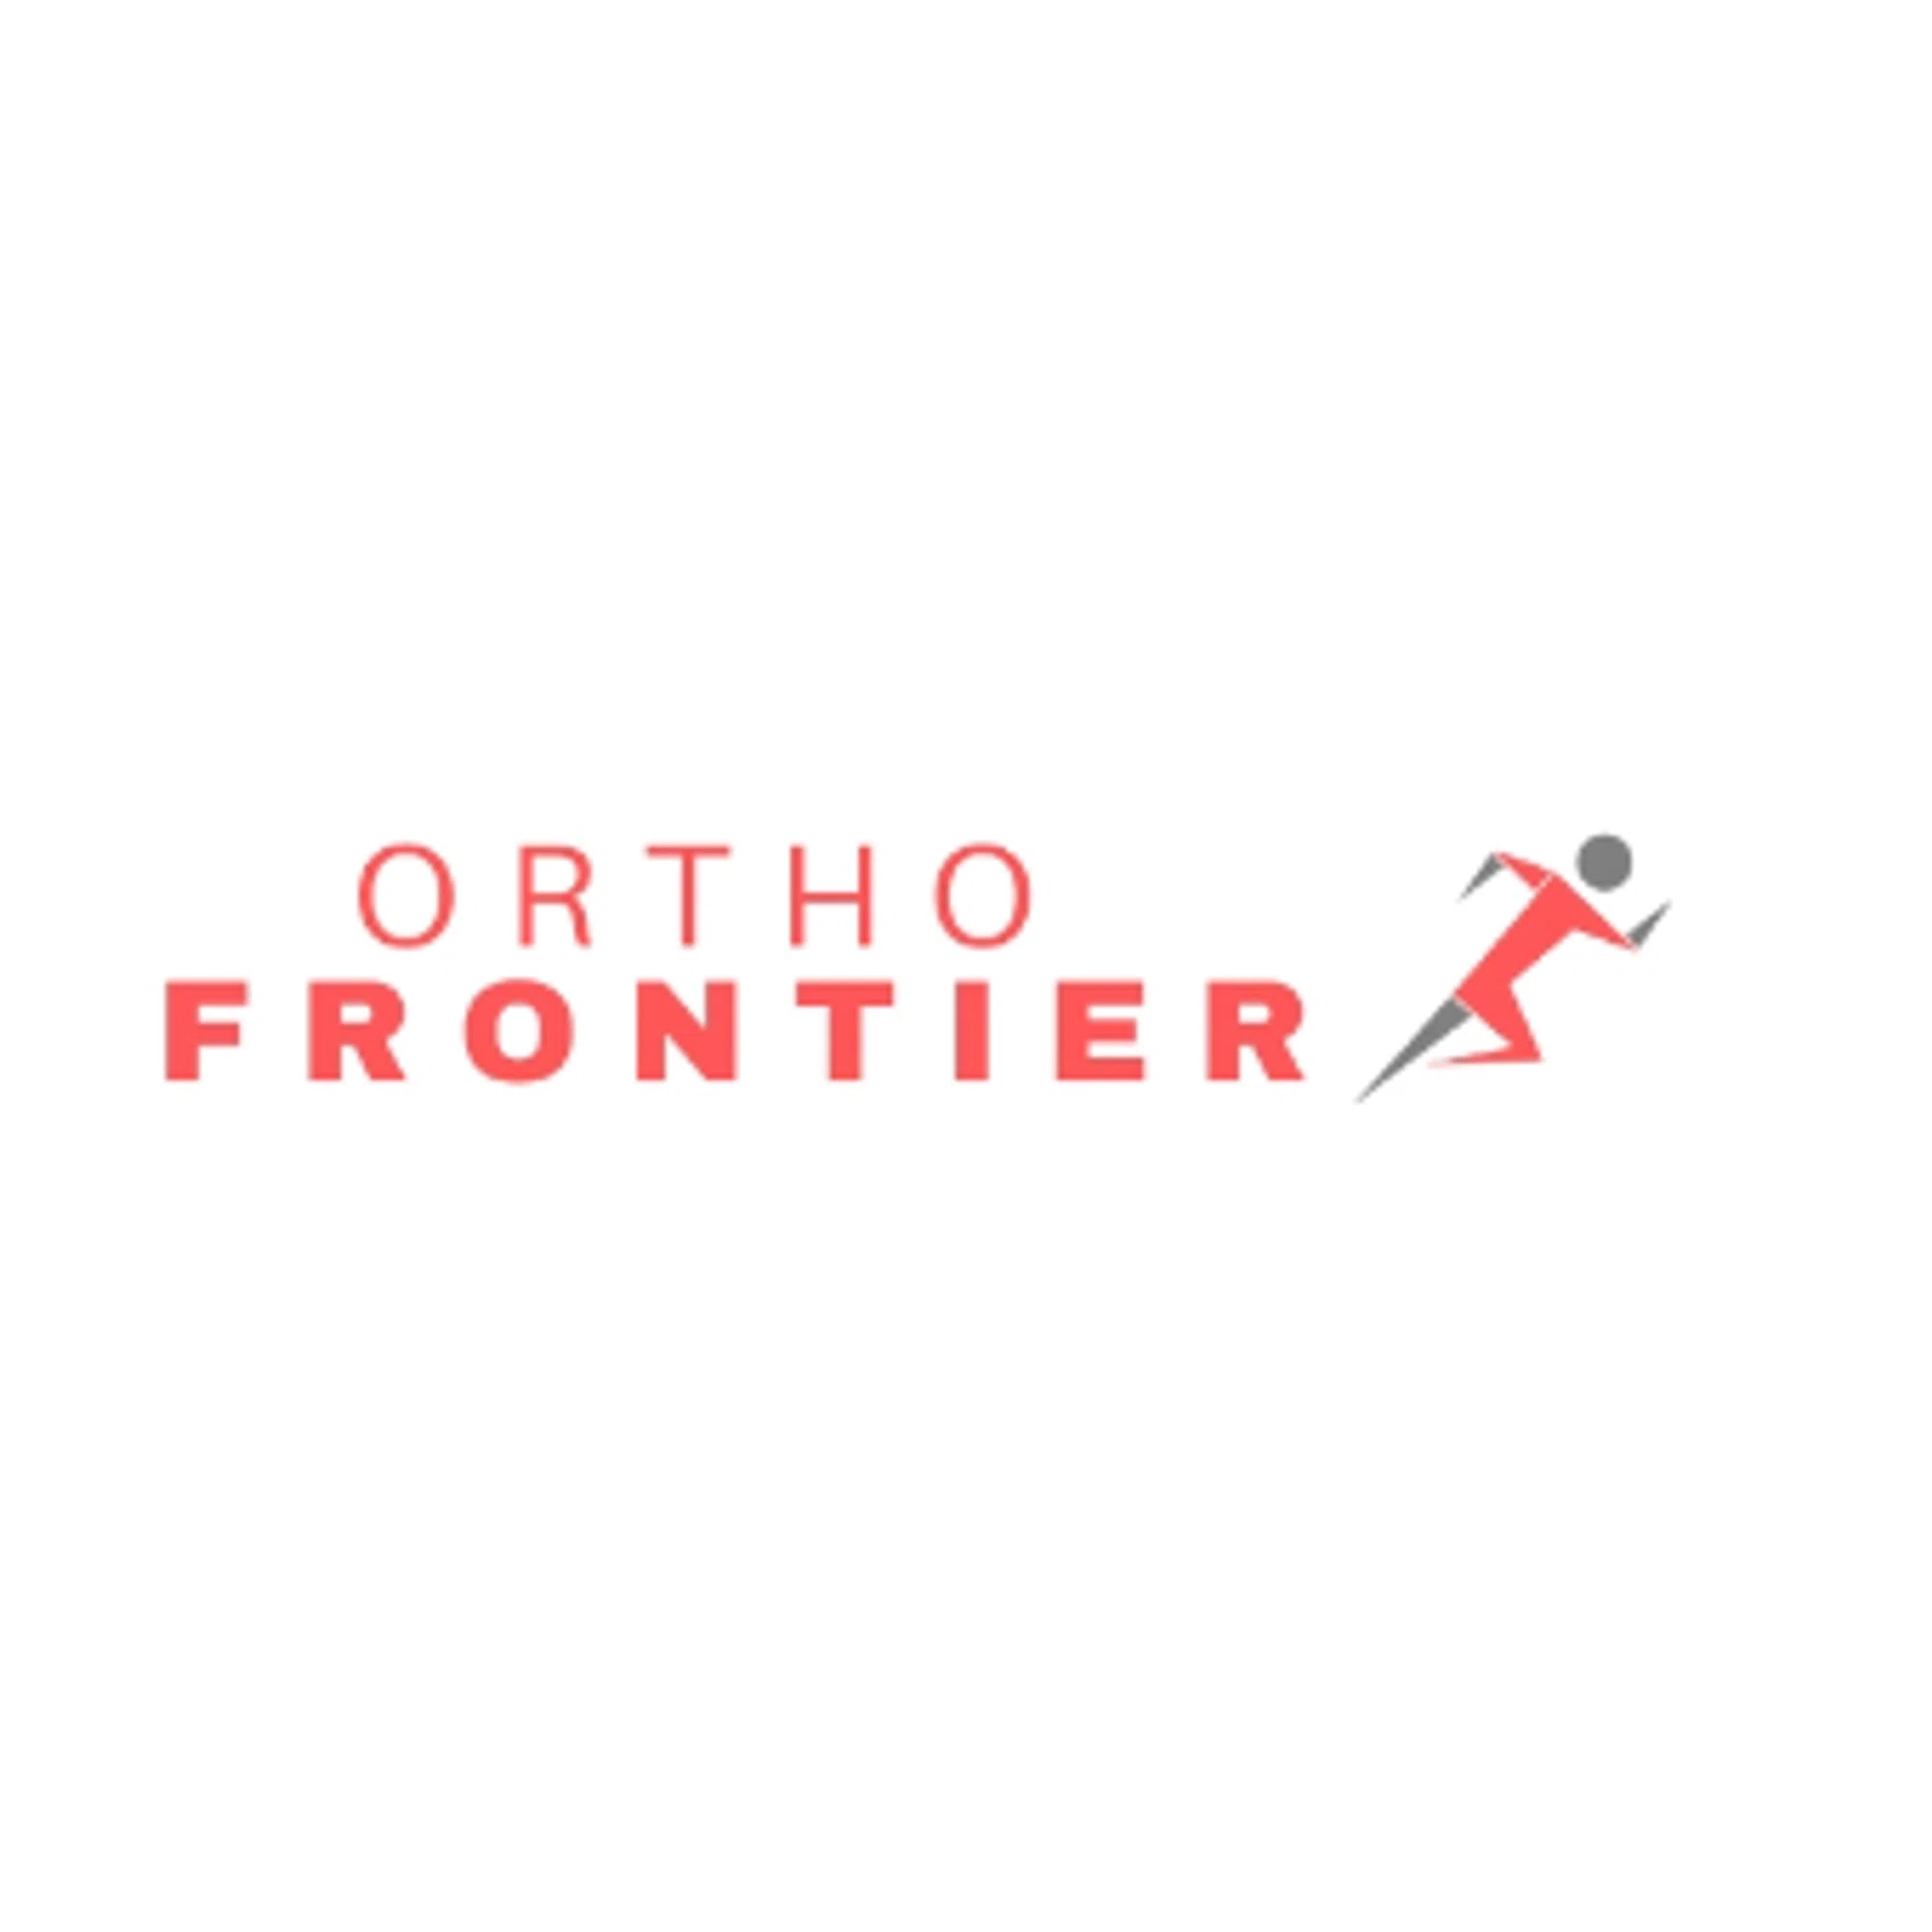 Ortho Frontier